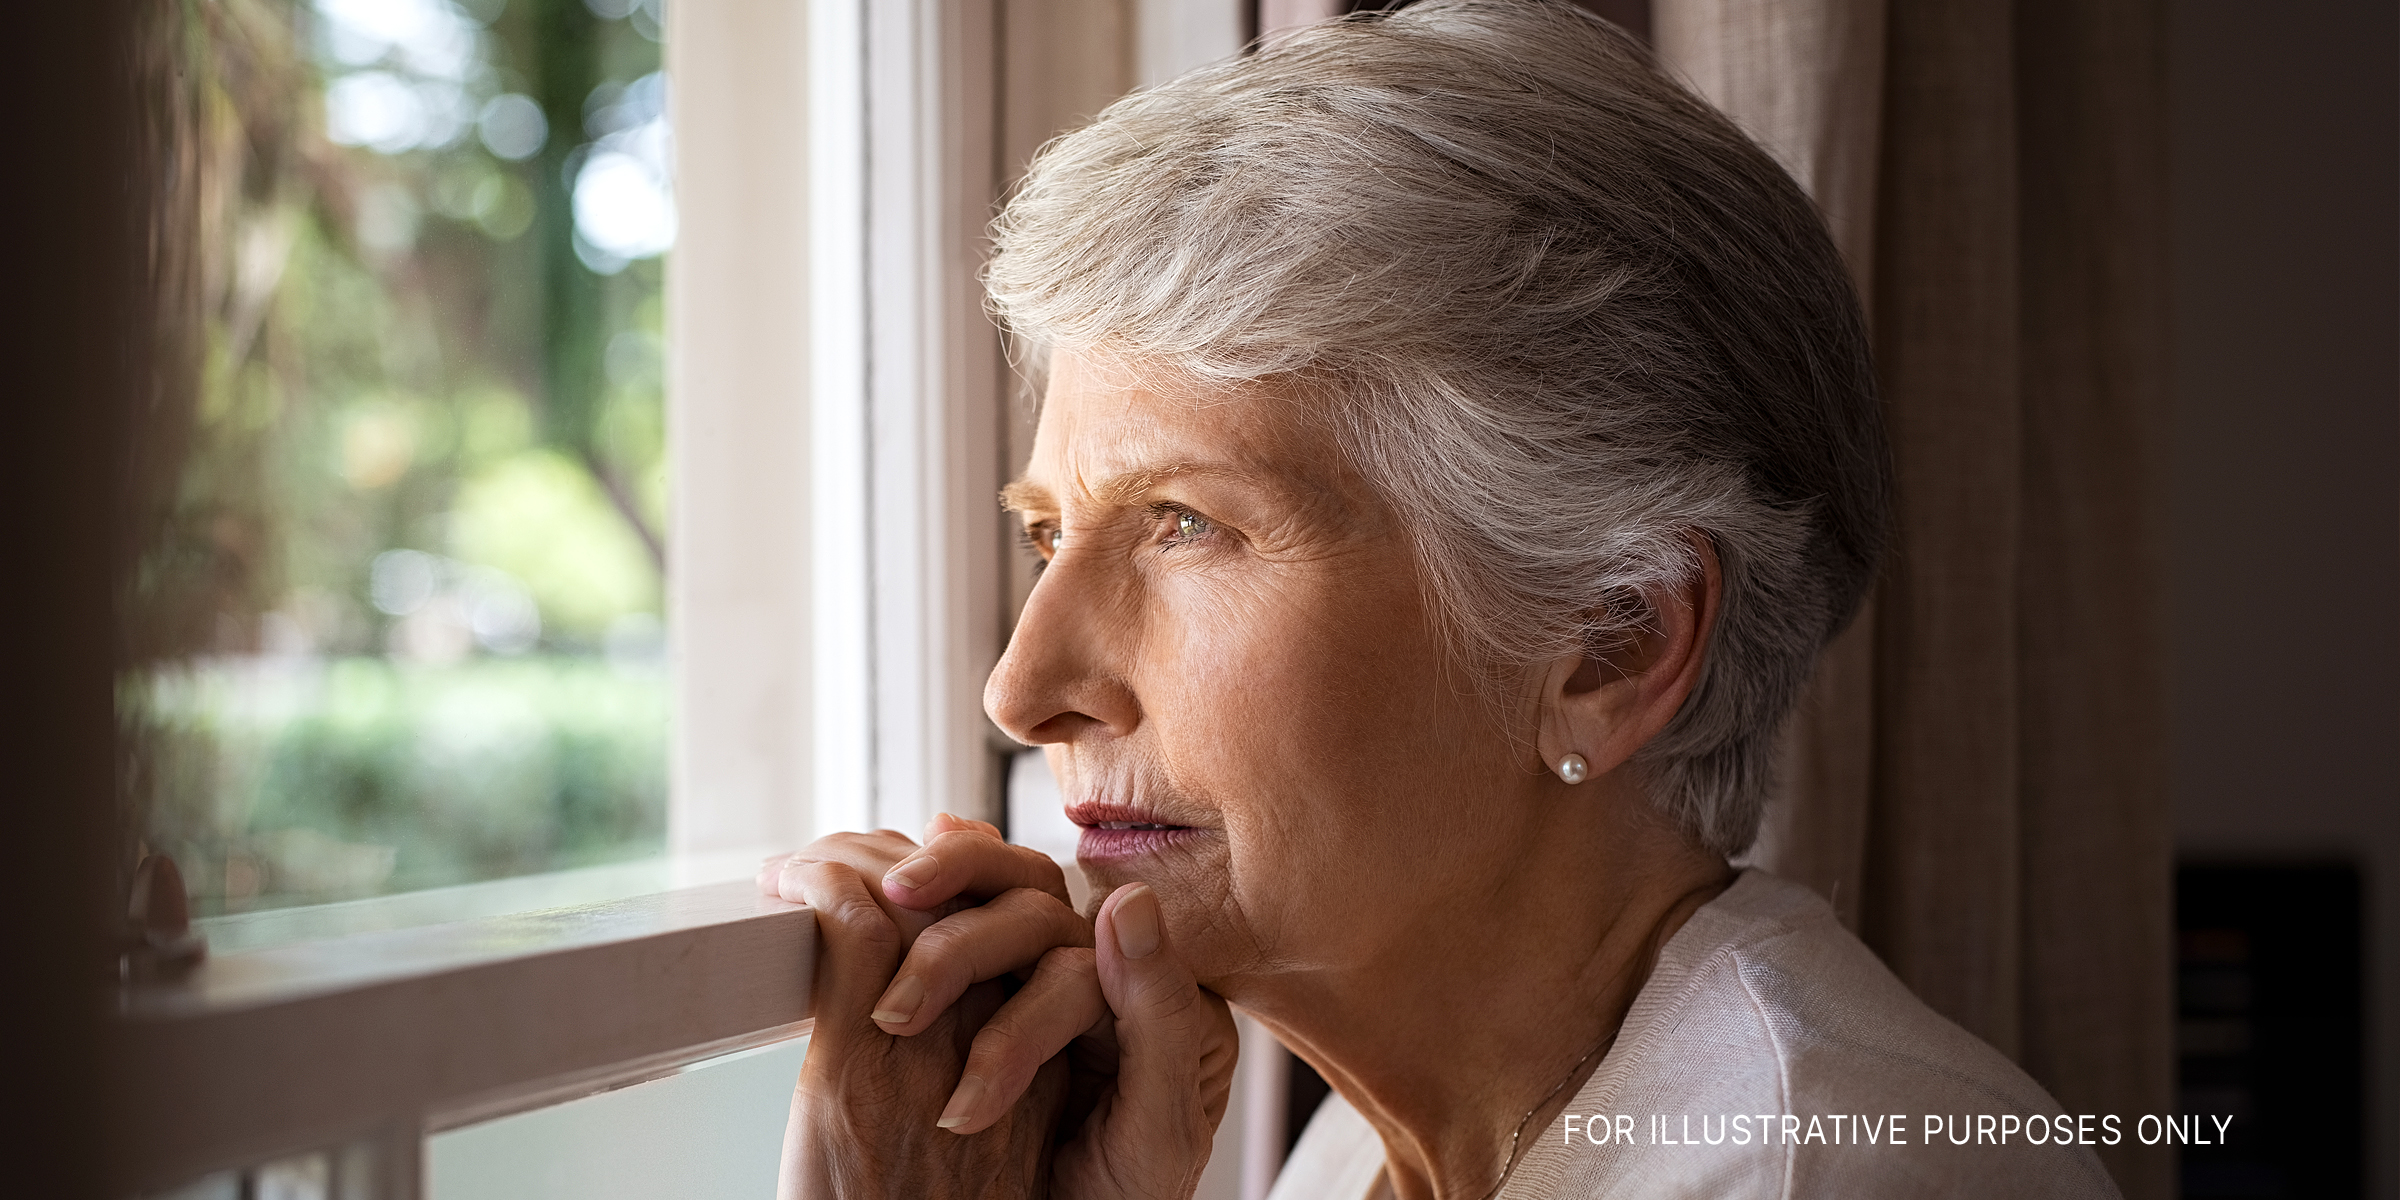 Senior woman looking out a window | Source: Getty Images